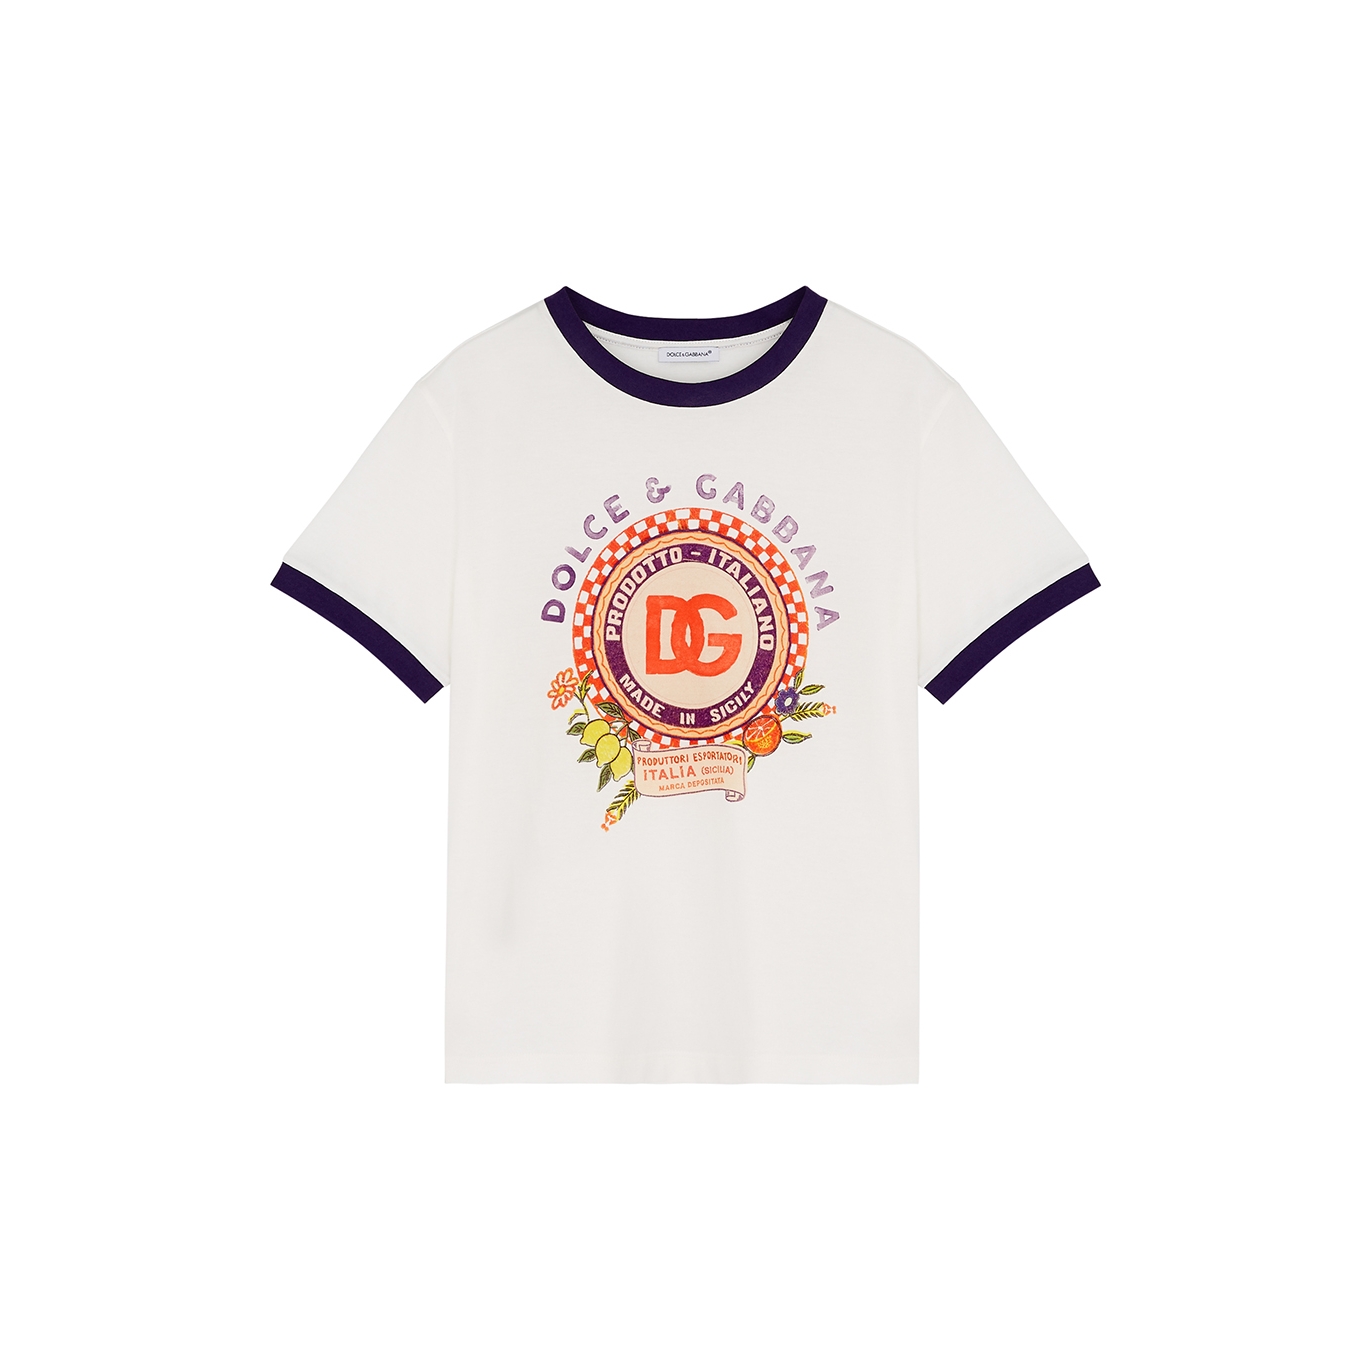 Dolce & Gabbana Kids White Printed Cotton T-shirt (8-12 Years) - White Other